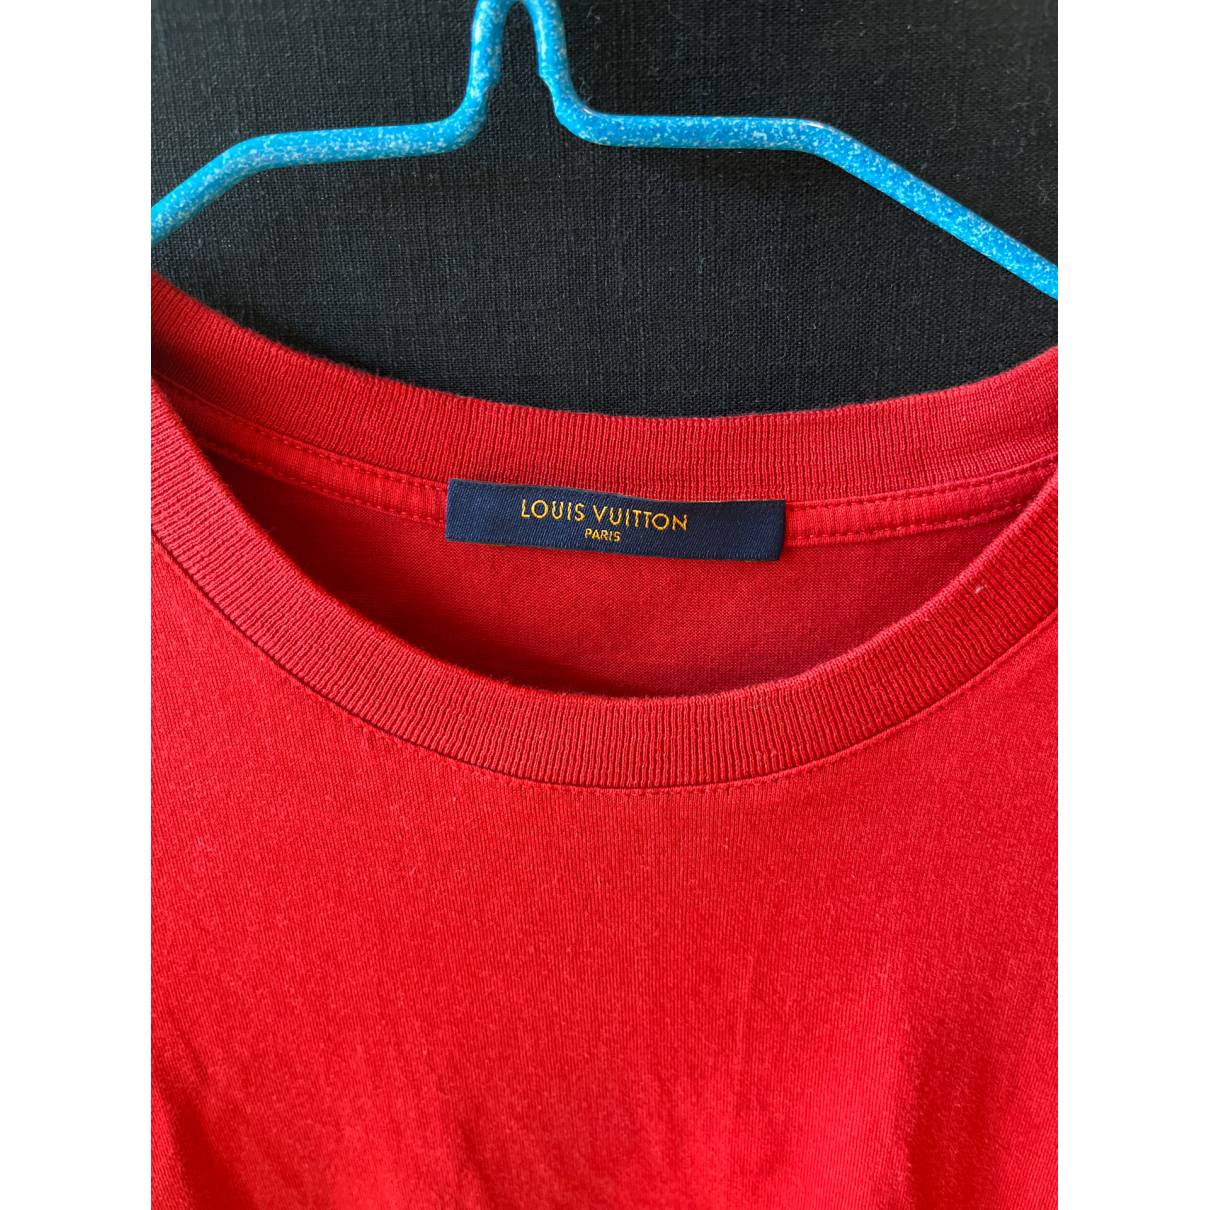 Louis Vuitton - Authenticated T-Shirt - Cotton Red for Men, Very Good Condition